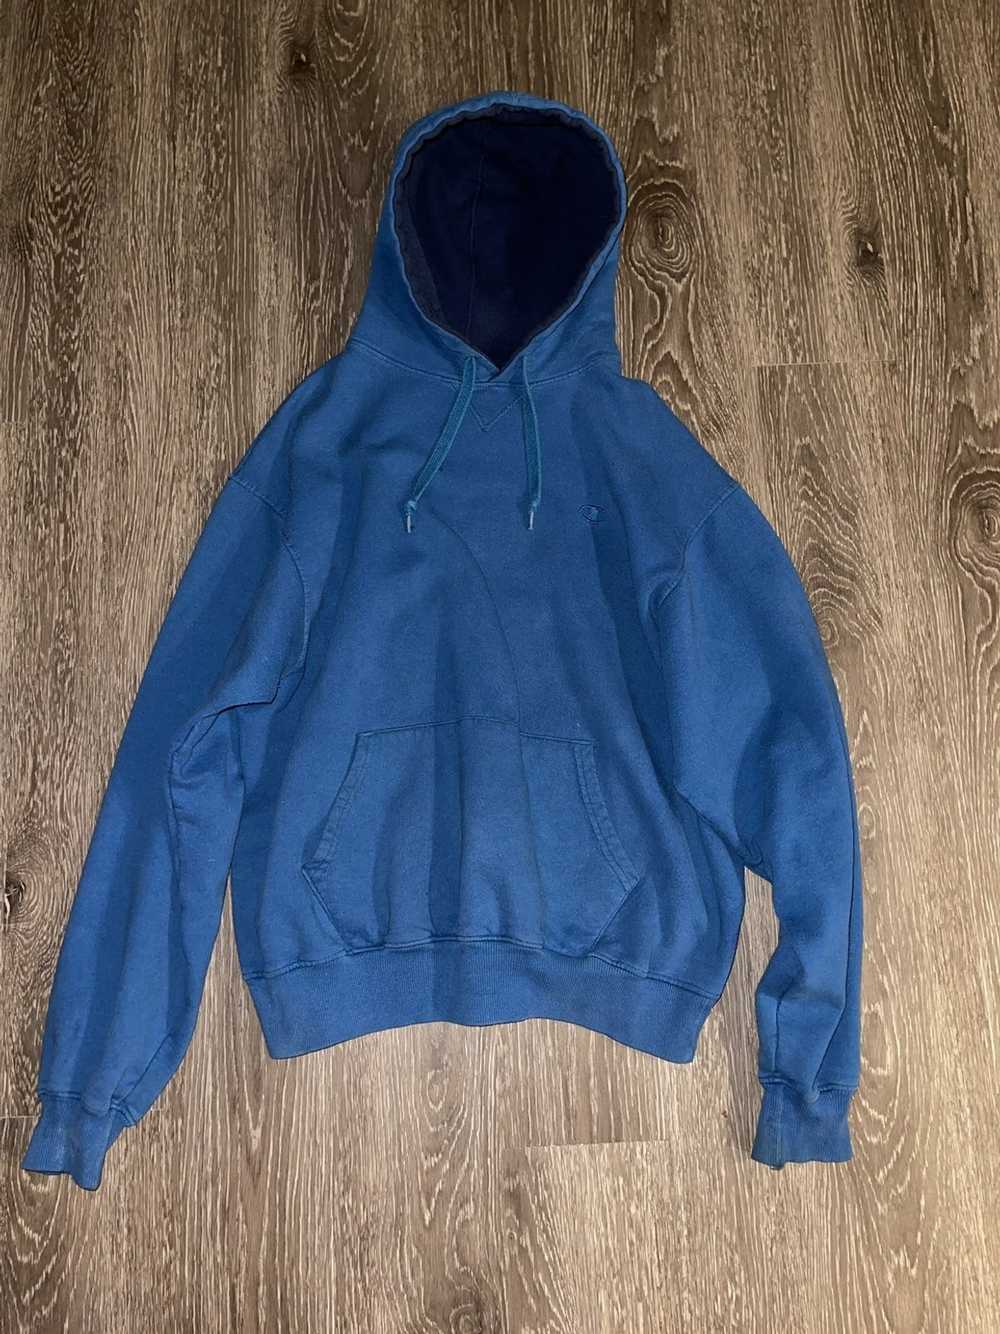 Champion Champion faded hoodie teal distressed 19… - image 4